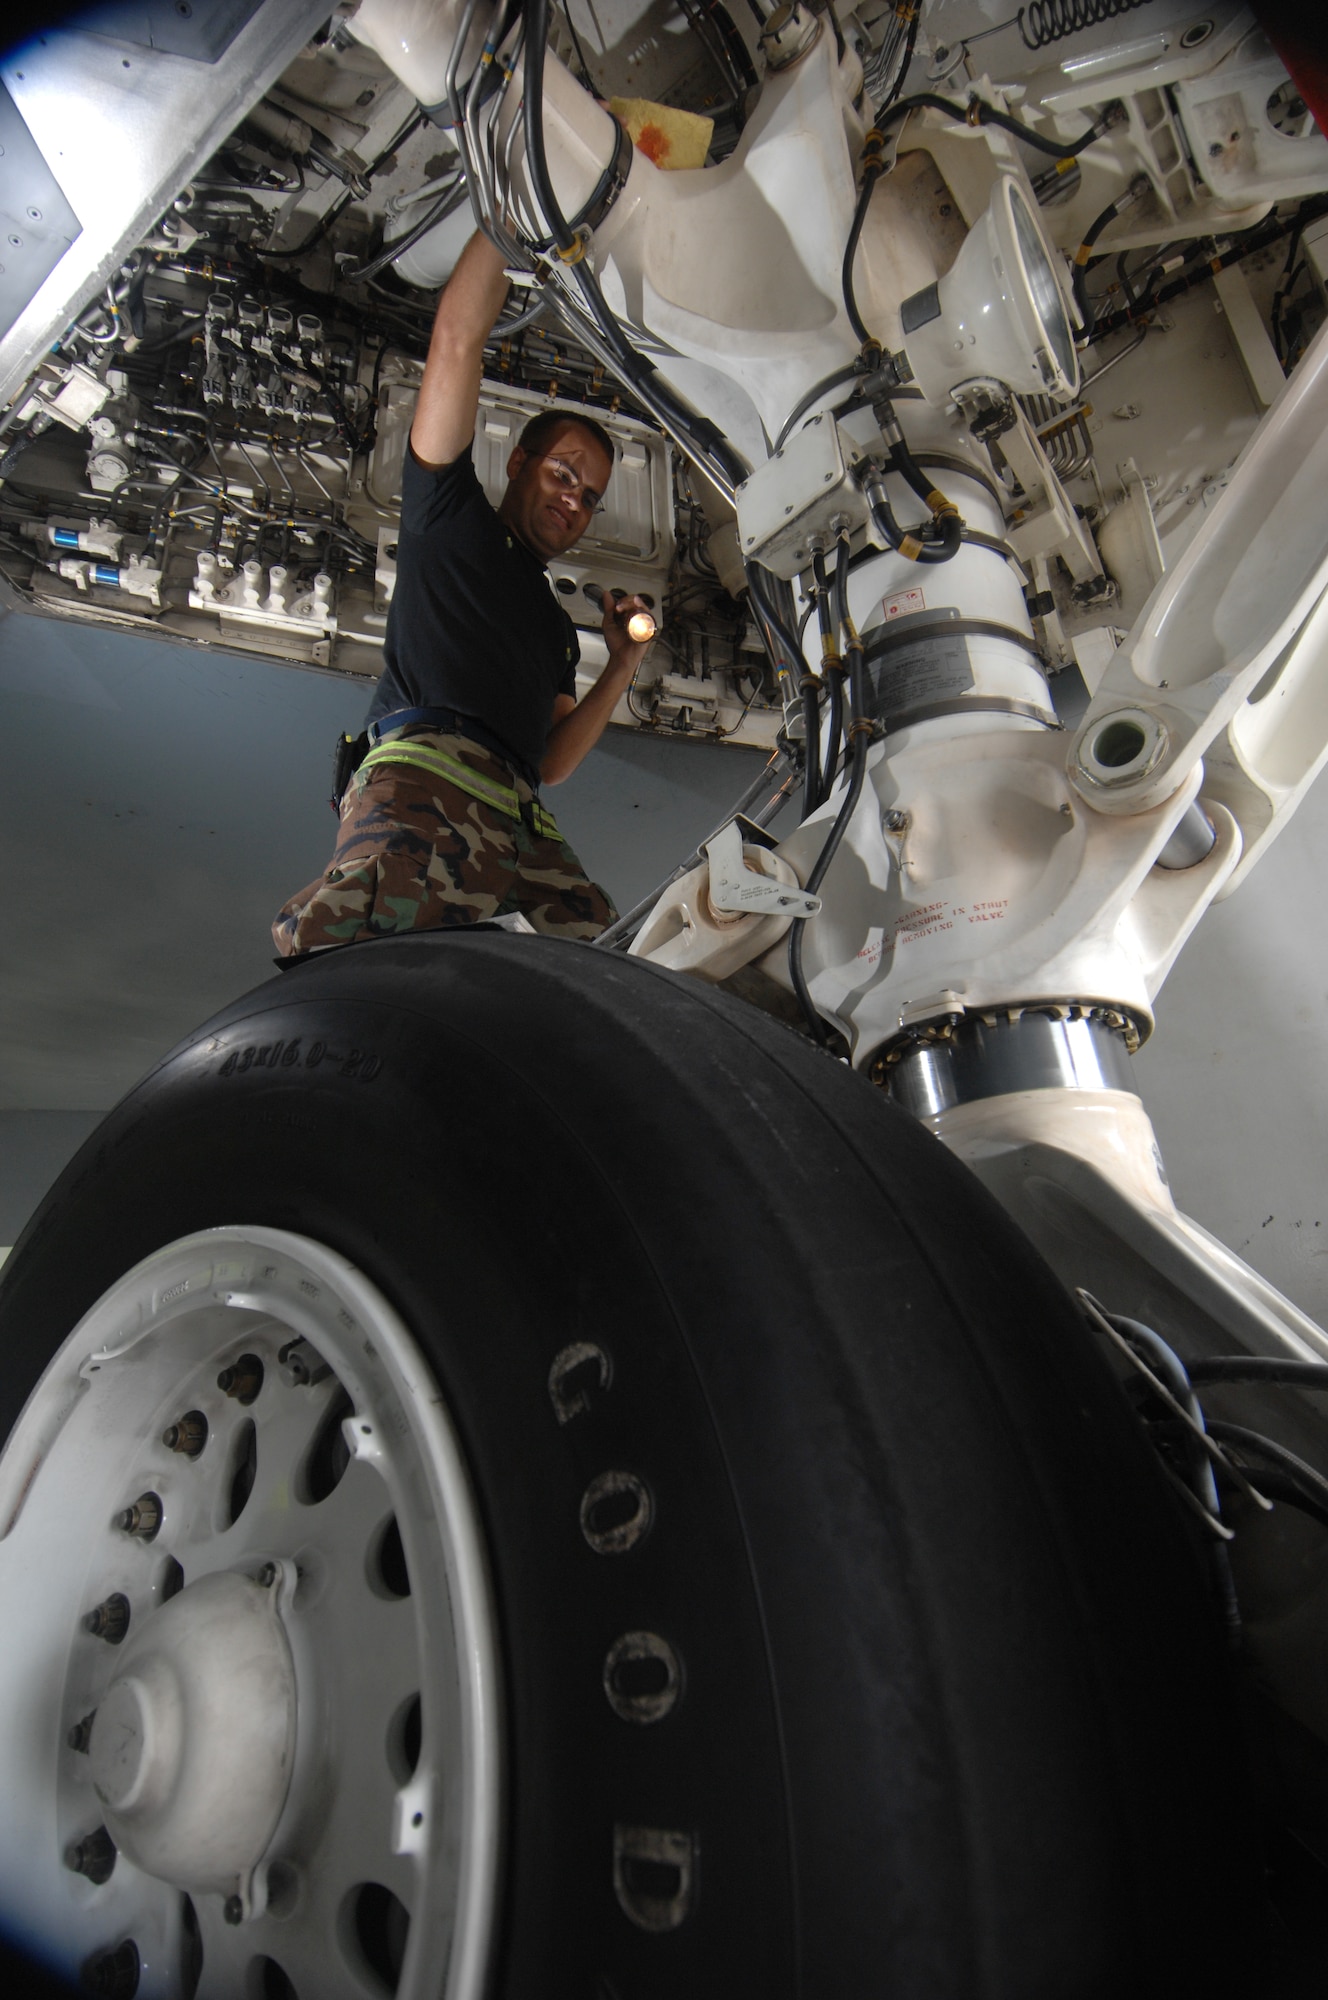 ANDERSEN AIR FORCE BASE, Guam -- Staff Sergeant Cory Cahill inspects a wheel well as part of routine pre-flight maintenance on a B-2 Spirit stealth bomber. Sergeant Cahill is part of a maintenance team supporting the remaining B-2 Spirits at Andersen AFB. Keeping the B-2 Spirit bomber at a mission-ready status requires lots of hard work and a huge team effort by all maintainers working on the multi-role stealth bomber. The B-2s here have remained suspended pending the results from a safety investigation board following the first-ever crash of a stealth bomber Feb. 23 here, at Andersen AFB. The continuous bomber presence demonstrates U.S. commitment to promote security and stability in the Pacific region. Sergeant Cahill is with the 36th Expeditionary Aircraft Maintenance Squadron and is deployed from the 509th Bomb Wing, Whiteman, AFB, Mo. (U.S. Air Force photo by Staff Sgt. Vanessa Valentine)
